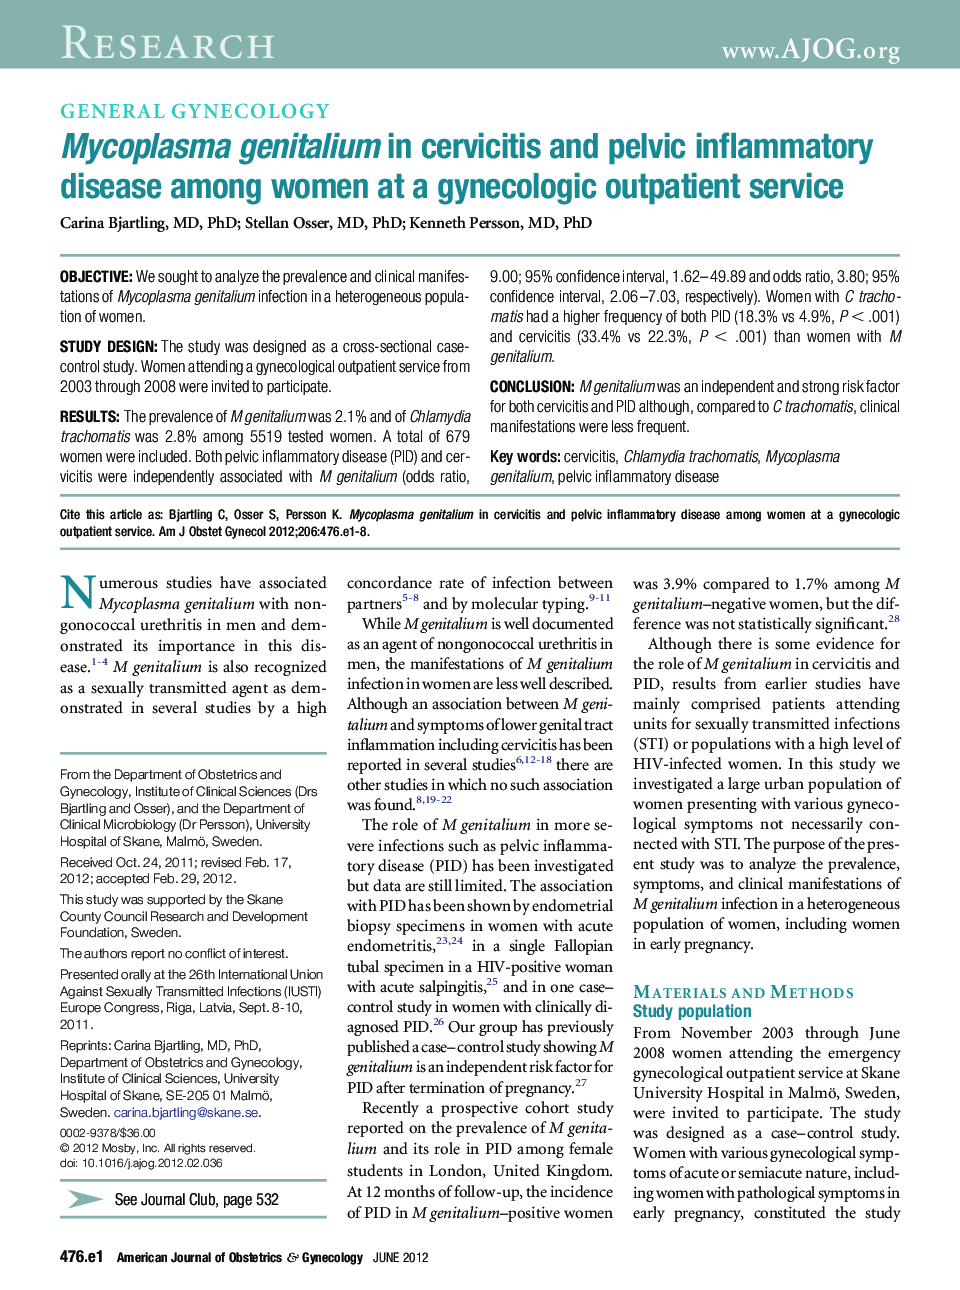 Mycoplasma genitalium in cervicitis and pelvic inflammatory disease among women at a gynecologic outpatient service